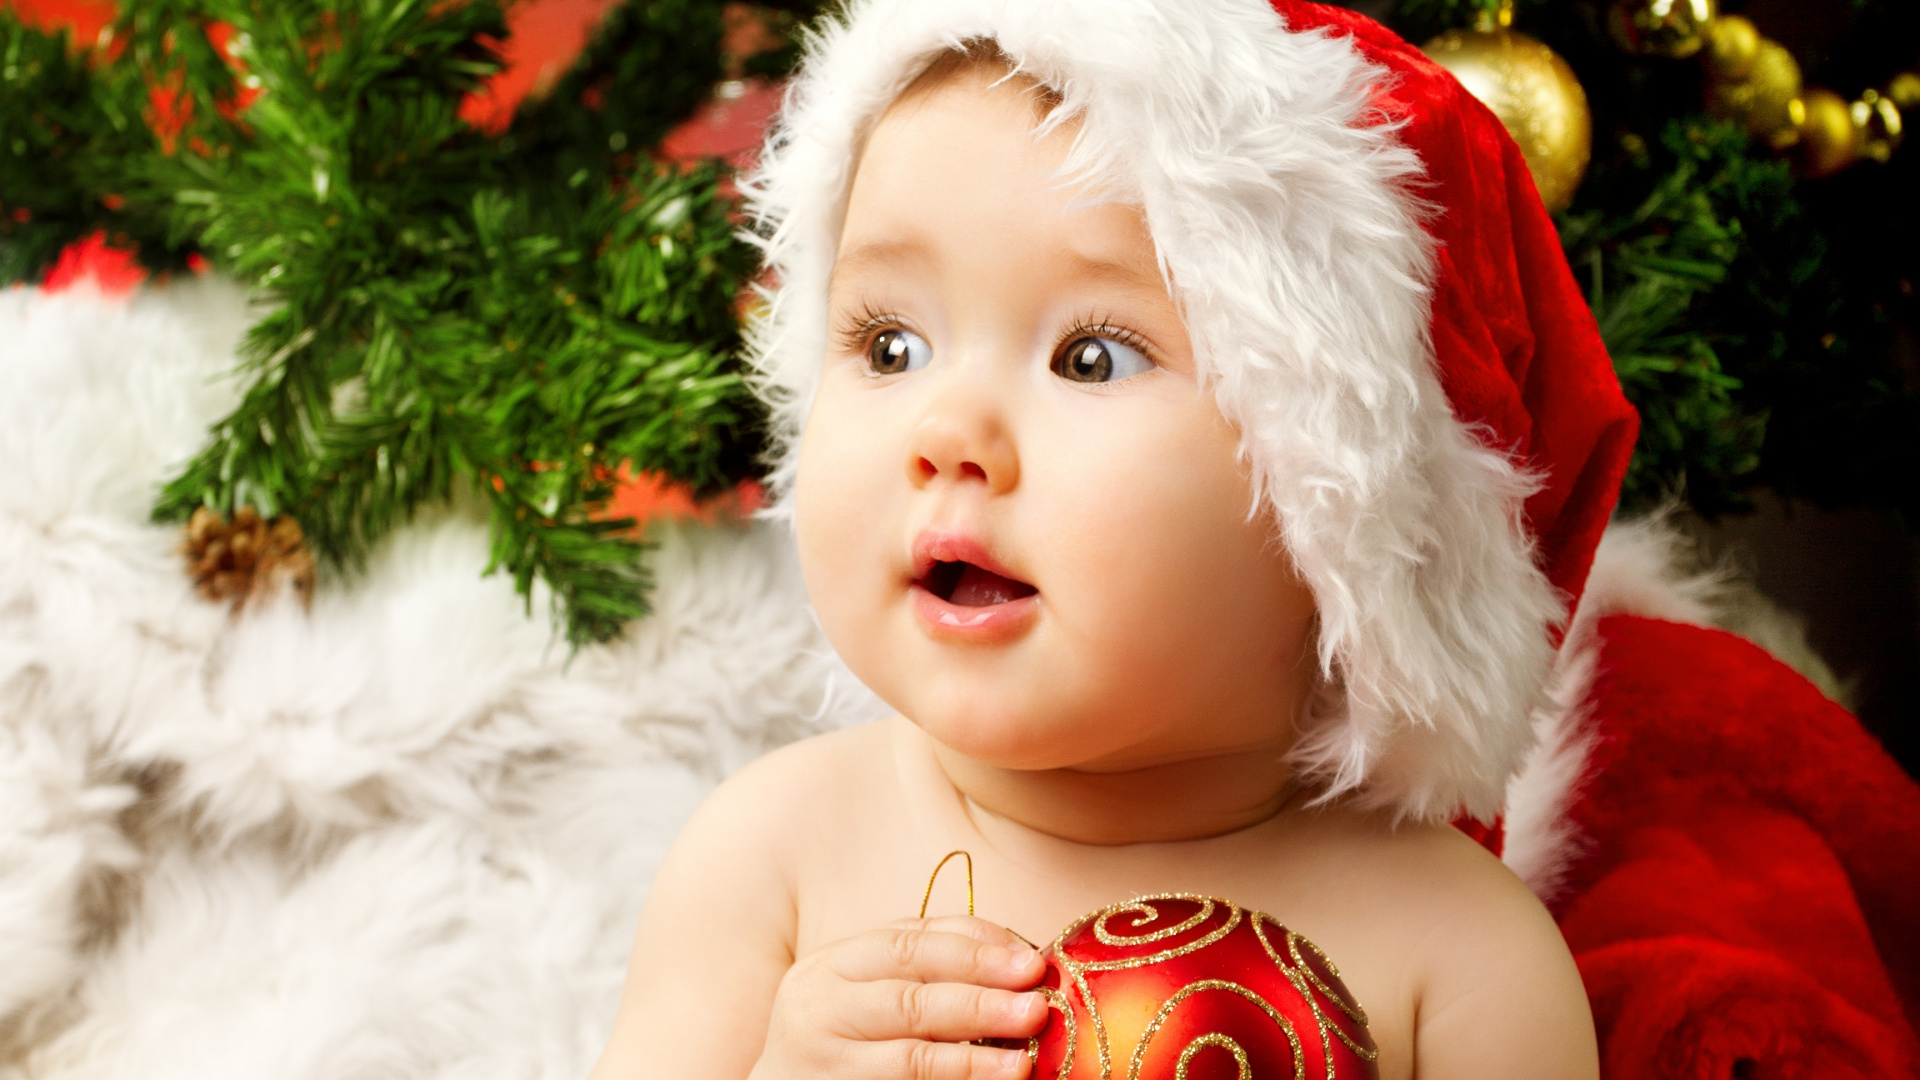 Christmas Day, Infant, Cuteness, Christmas, Child. Wallpaper in 1920x1080 Resolution